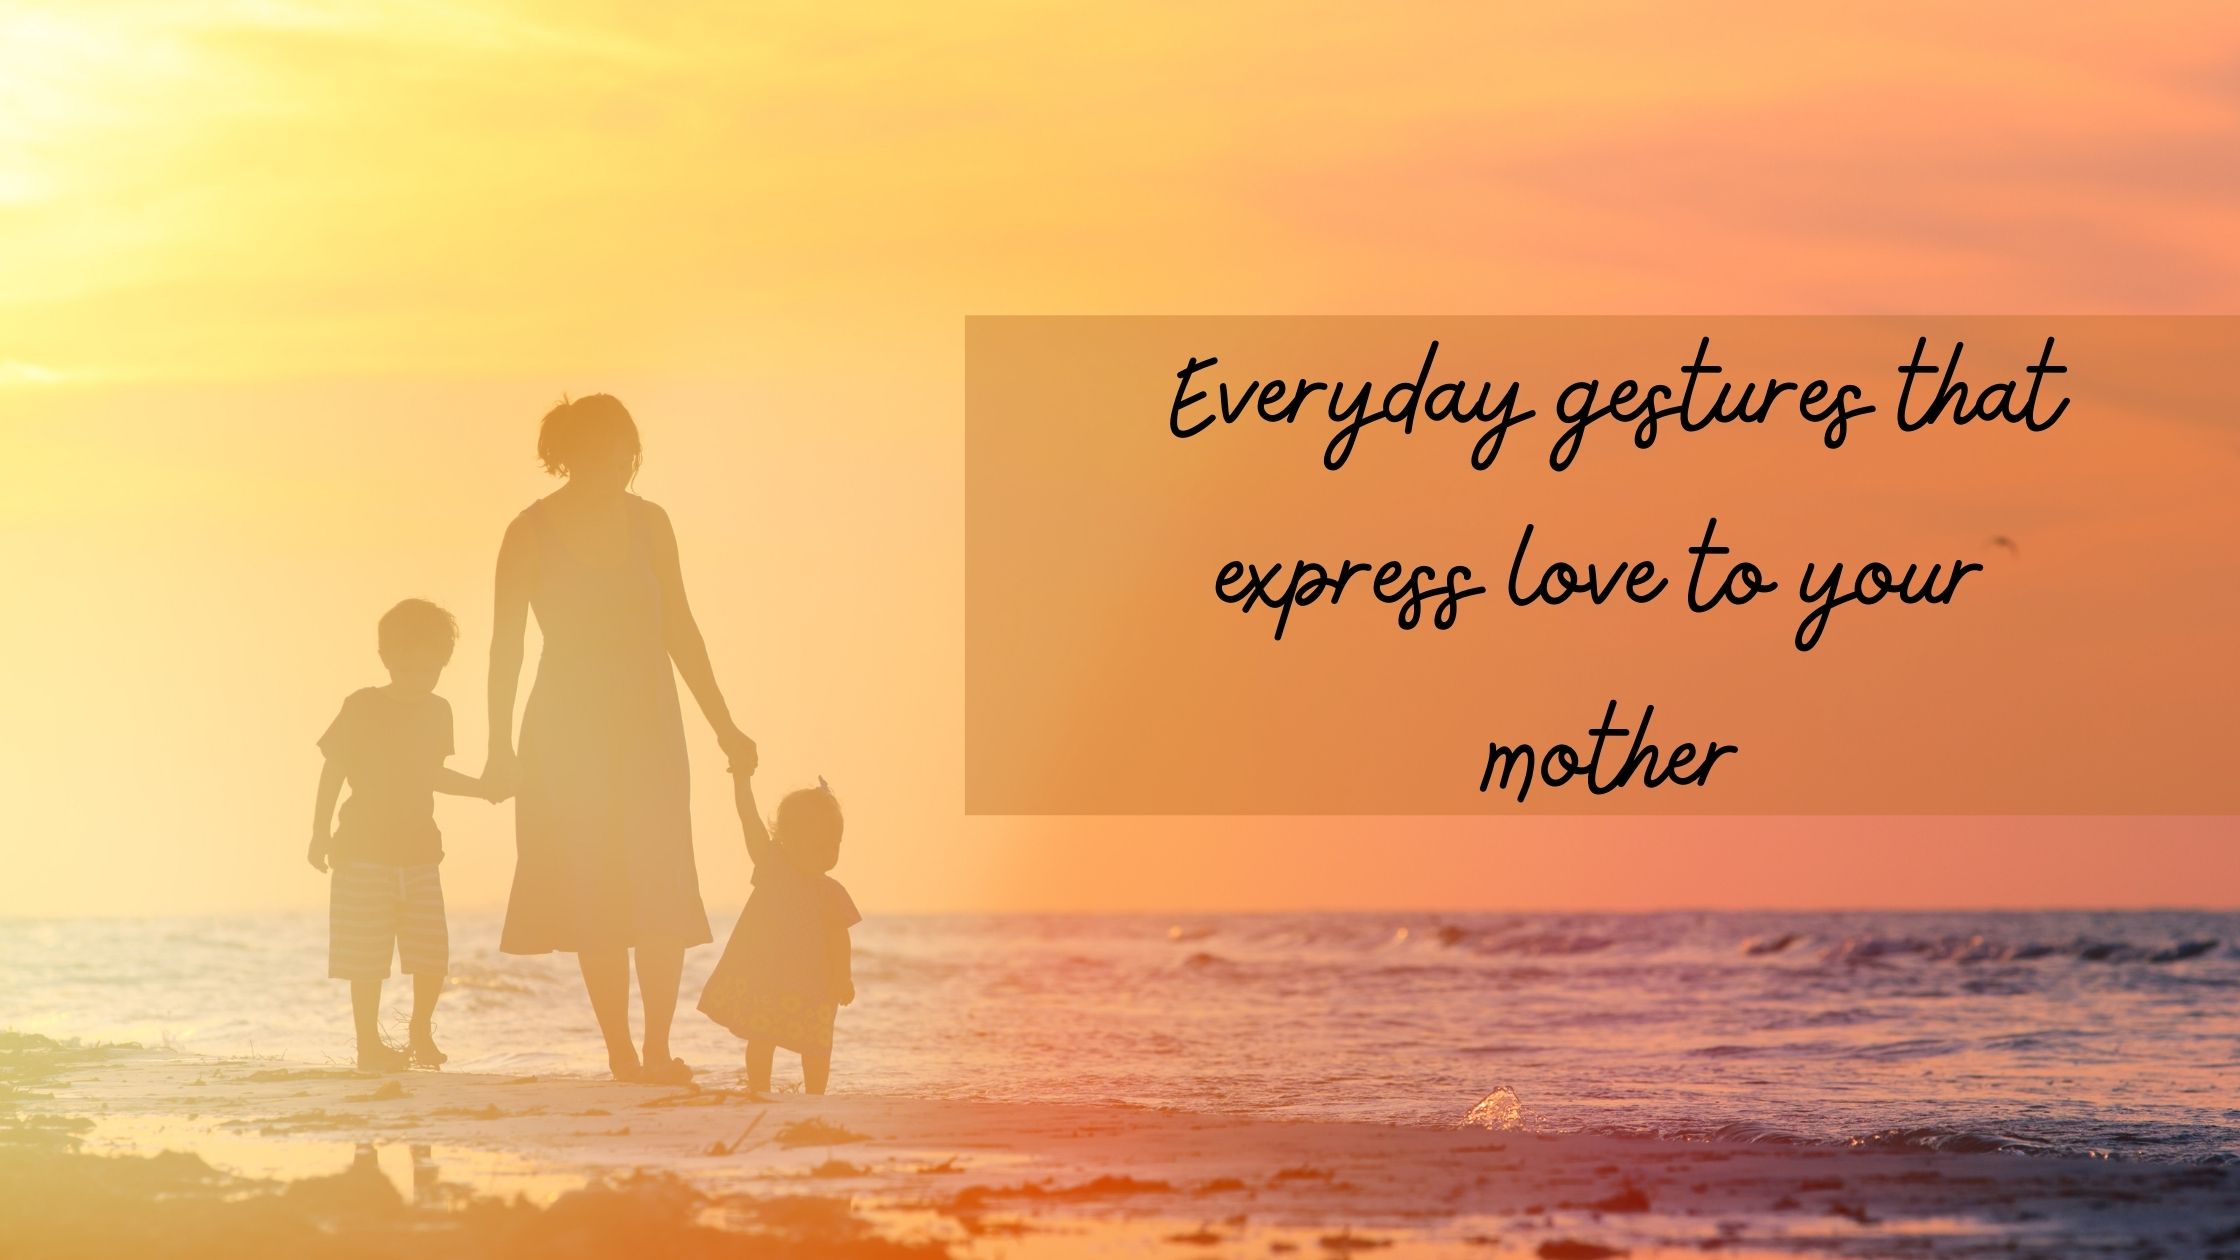 Everyday gestures that express love to your mother